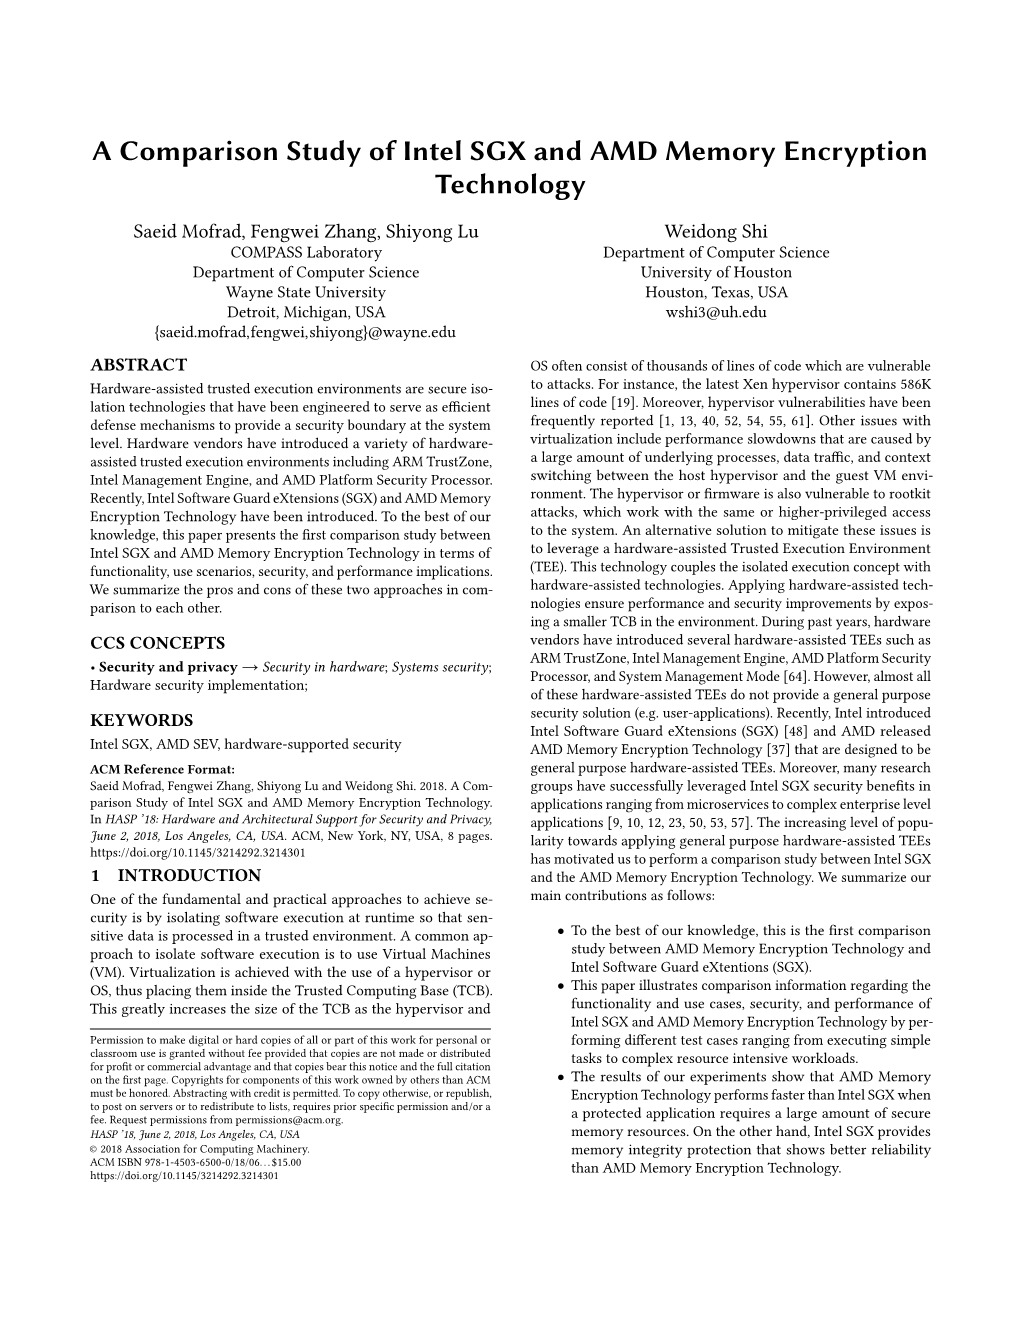 A Comparison Study of Intel SGX and AMD Memory Encryption Technology